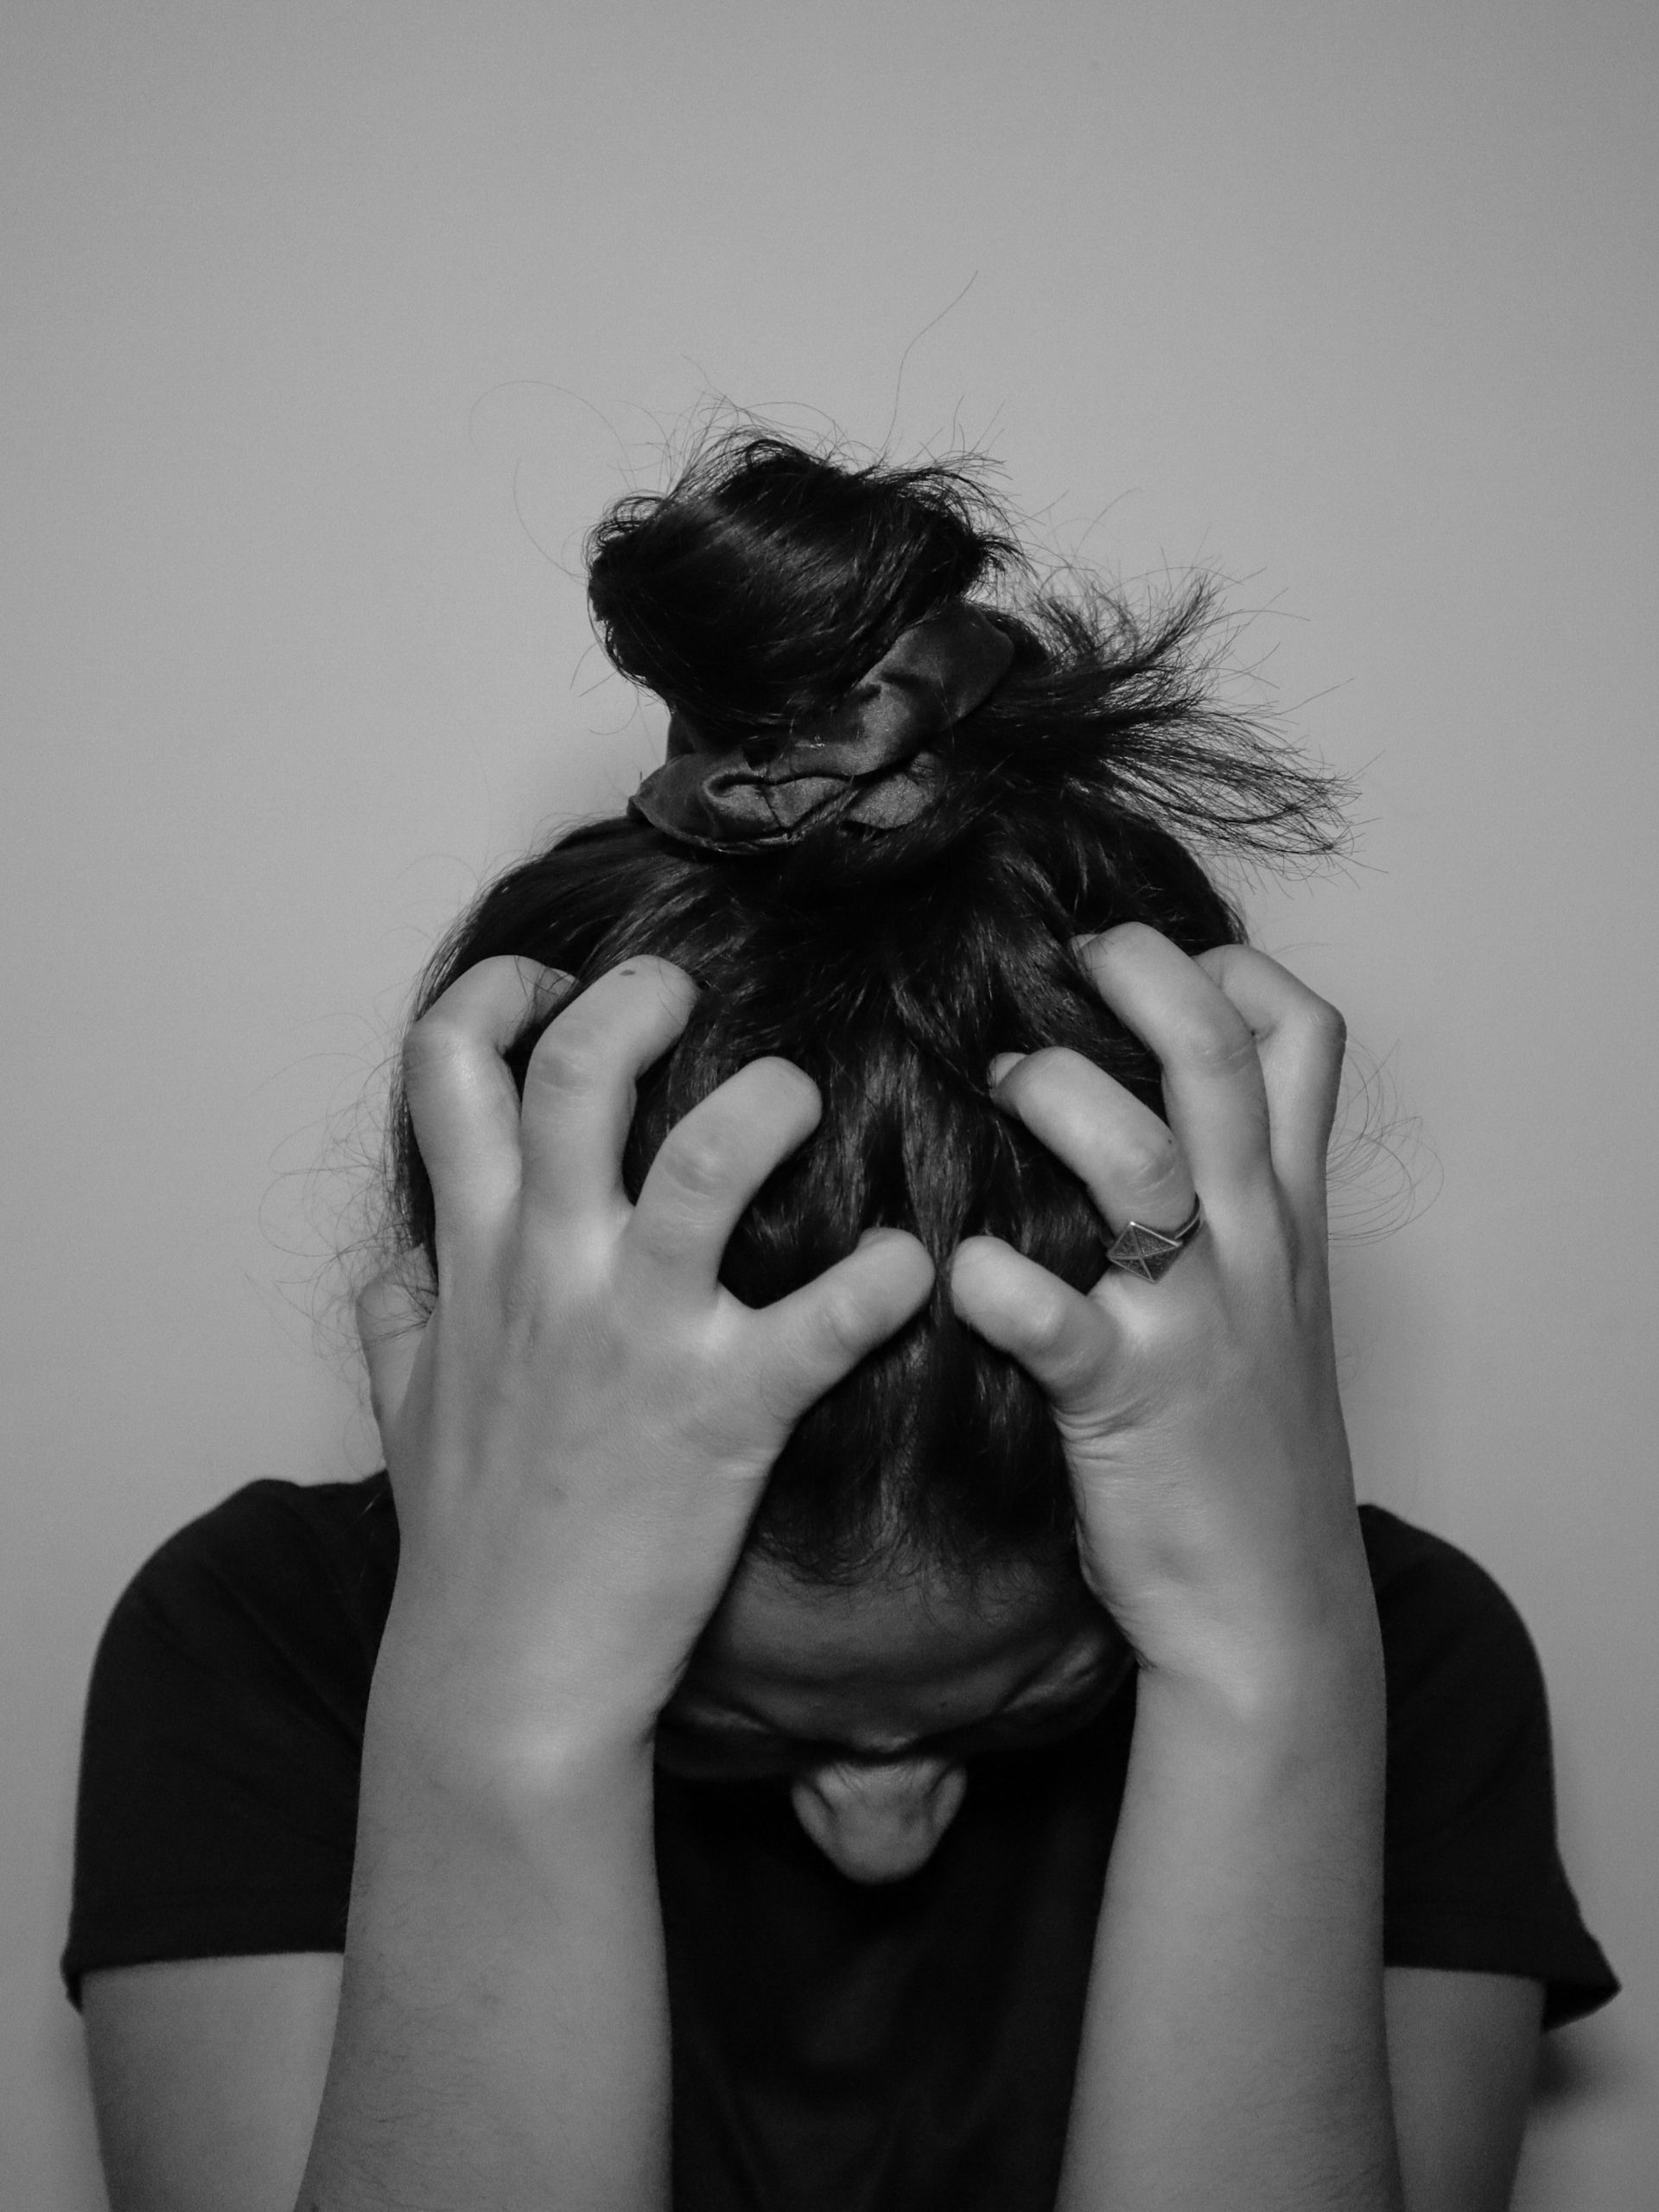 a stock image of a woman with her hair tied up in a messy bun and she is scrunching her hair on her head. The photo is in black and white.